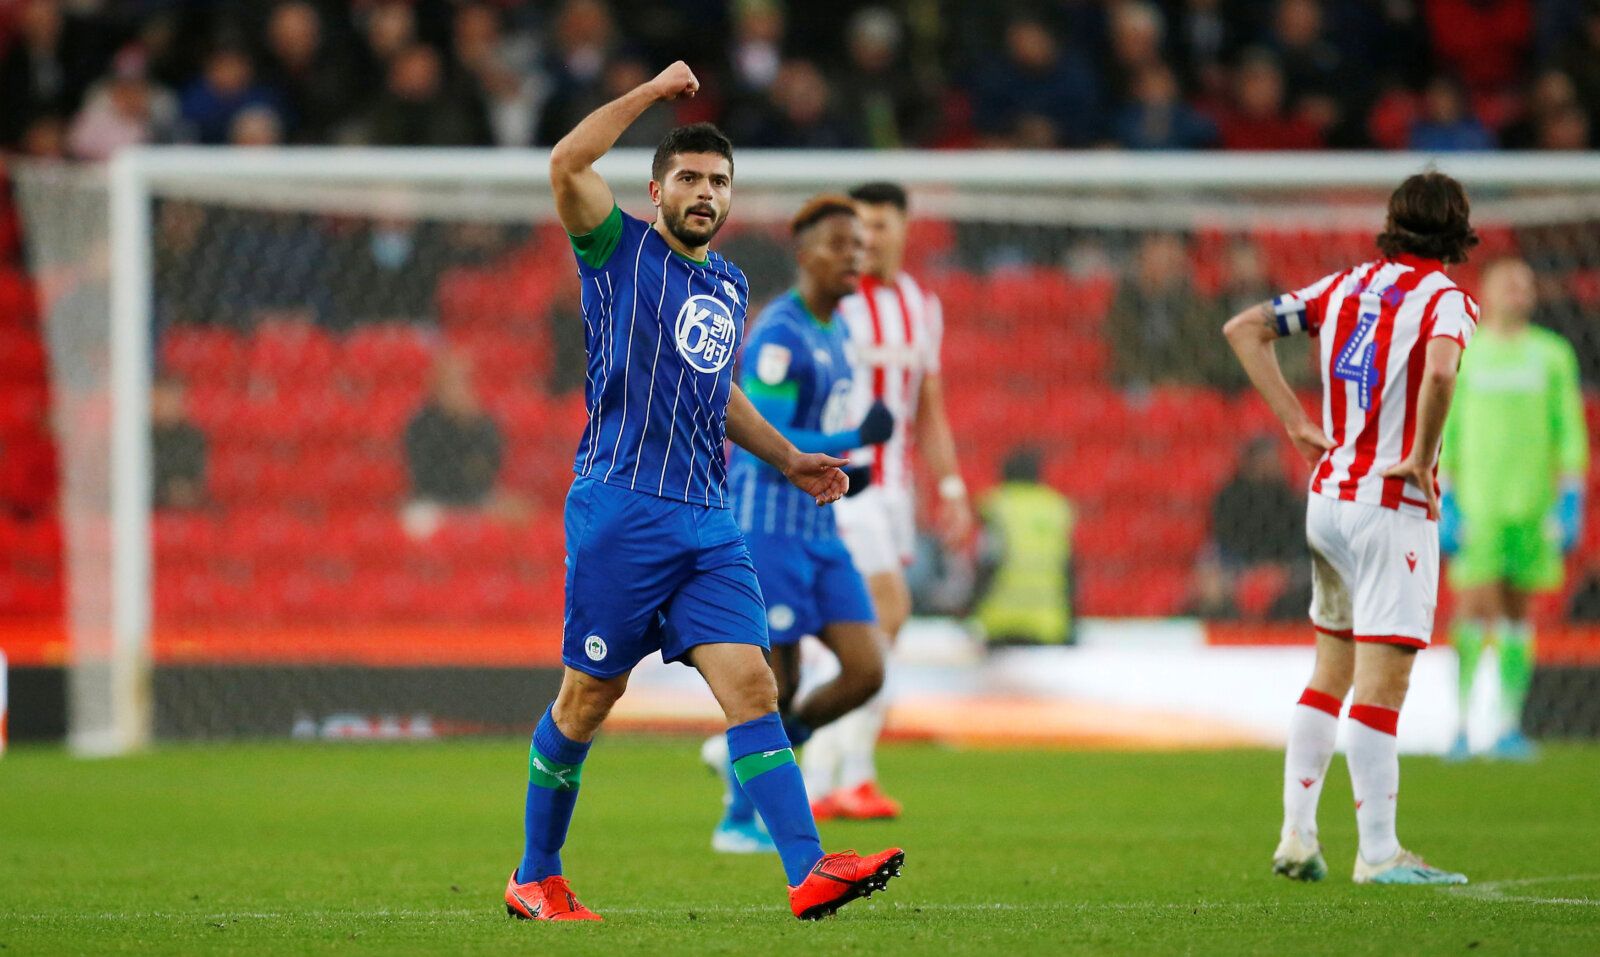 Soccer Football - Championship - Stoke City v Wigan Athletic - bet365 Stadium, Stoke-on-Trent, Britain - November 23, 2019   Wigan Athletic's Sam Morsy celebrates scoring their first goal      Action Images/Craig Brough    EDITORIAL USE ONLY. No use with unauthorized audio, video, data, fixture lists, club/league logos or 